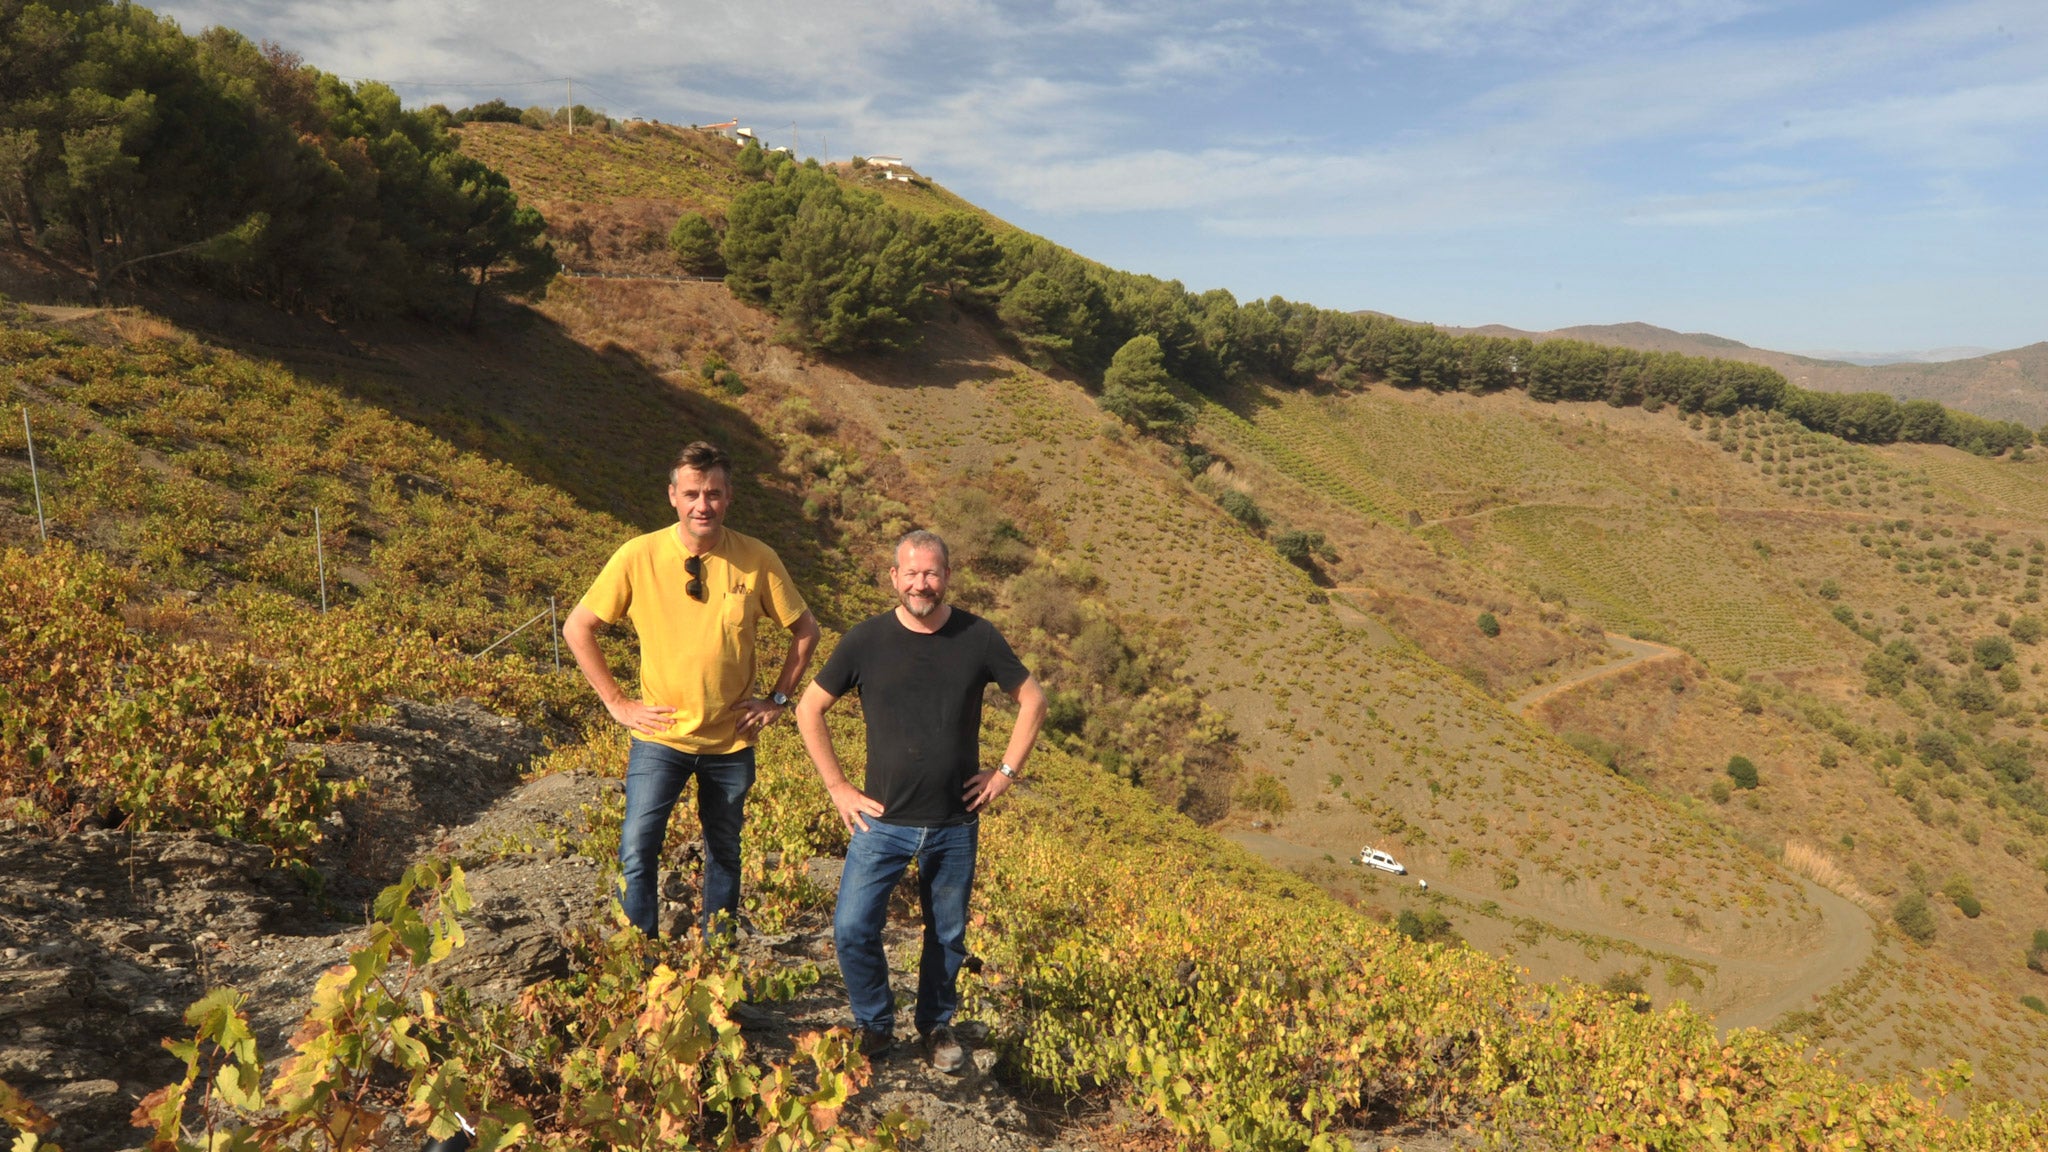 Matthew Desouter and Ben Giddings standing at the top of a steeply sloping vineyard in the Spanish wine region of Sierras de Malaga